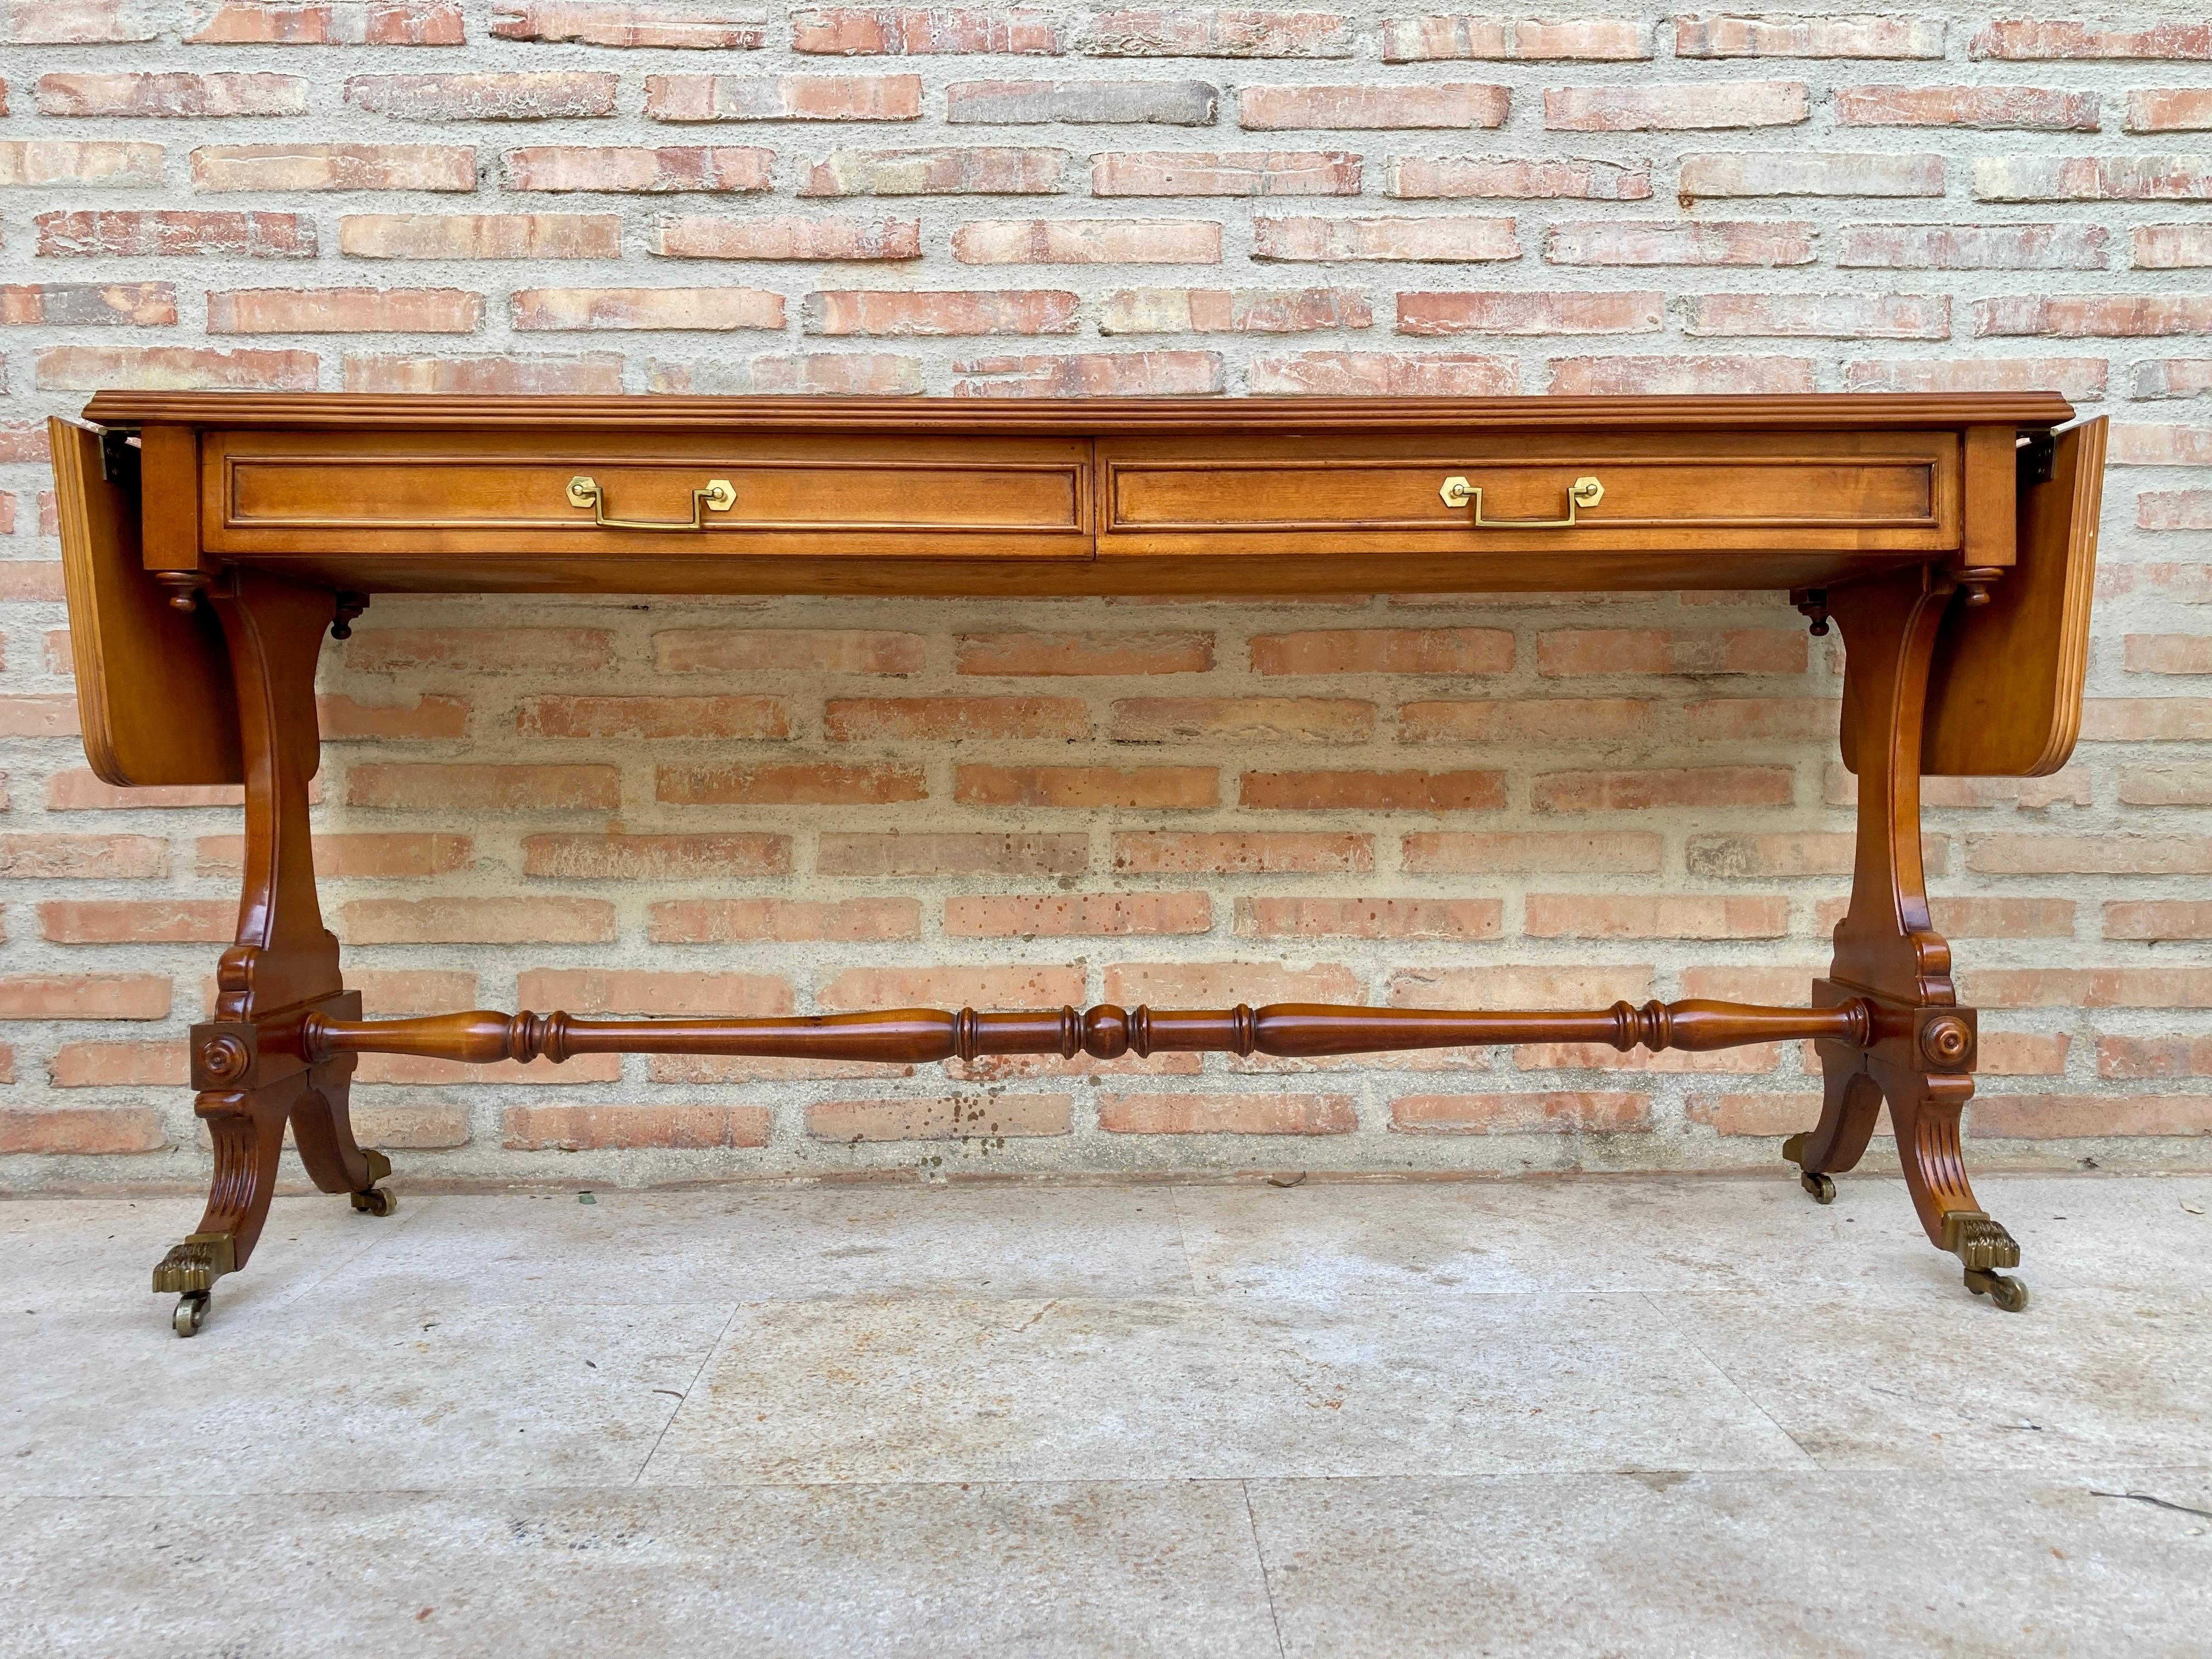 Mid-20th century winged console table in walnut with claw feet in bronze, two drawers and wheels.

Fabulous walnut inlaid console table from the mid-20th century.
Wonderfully preserved board with its knots in its root walnut wood.
Two perfectly